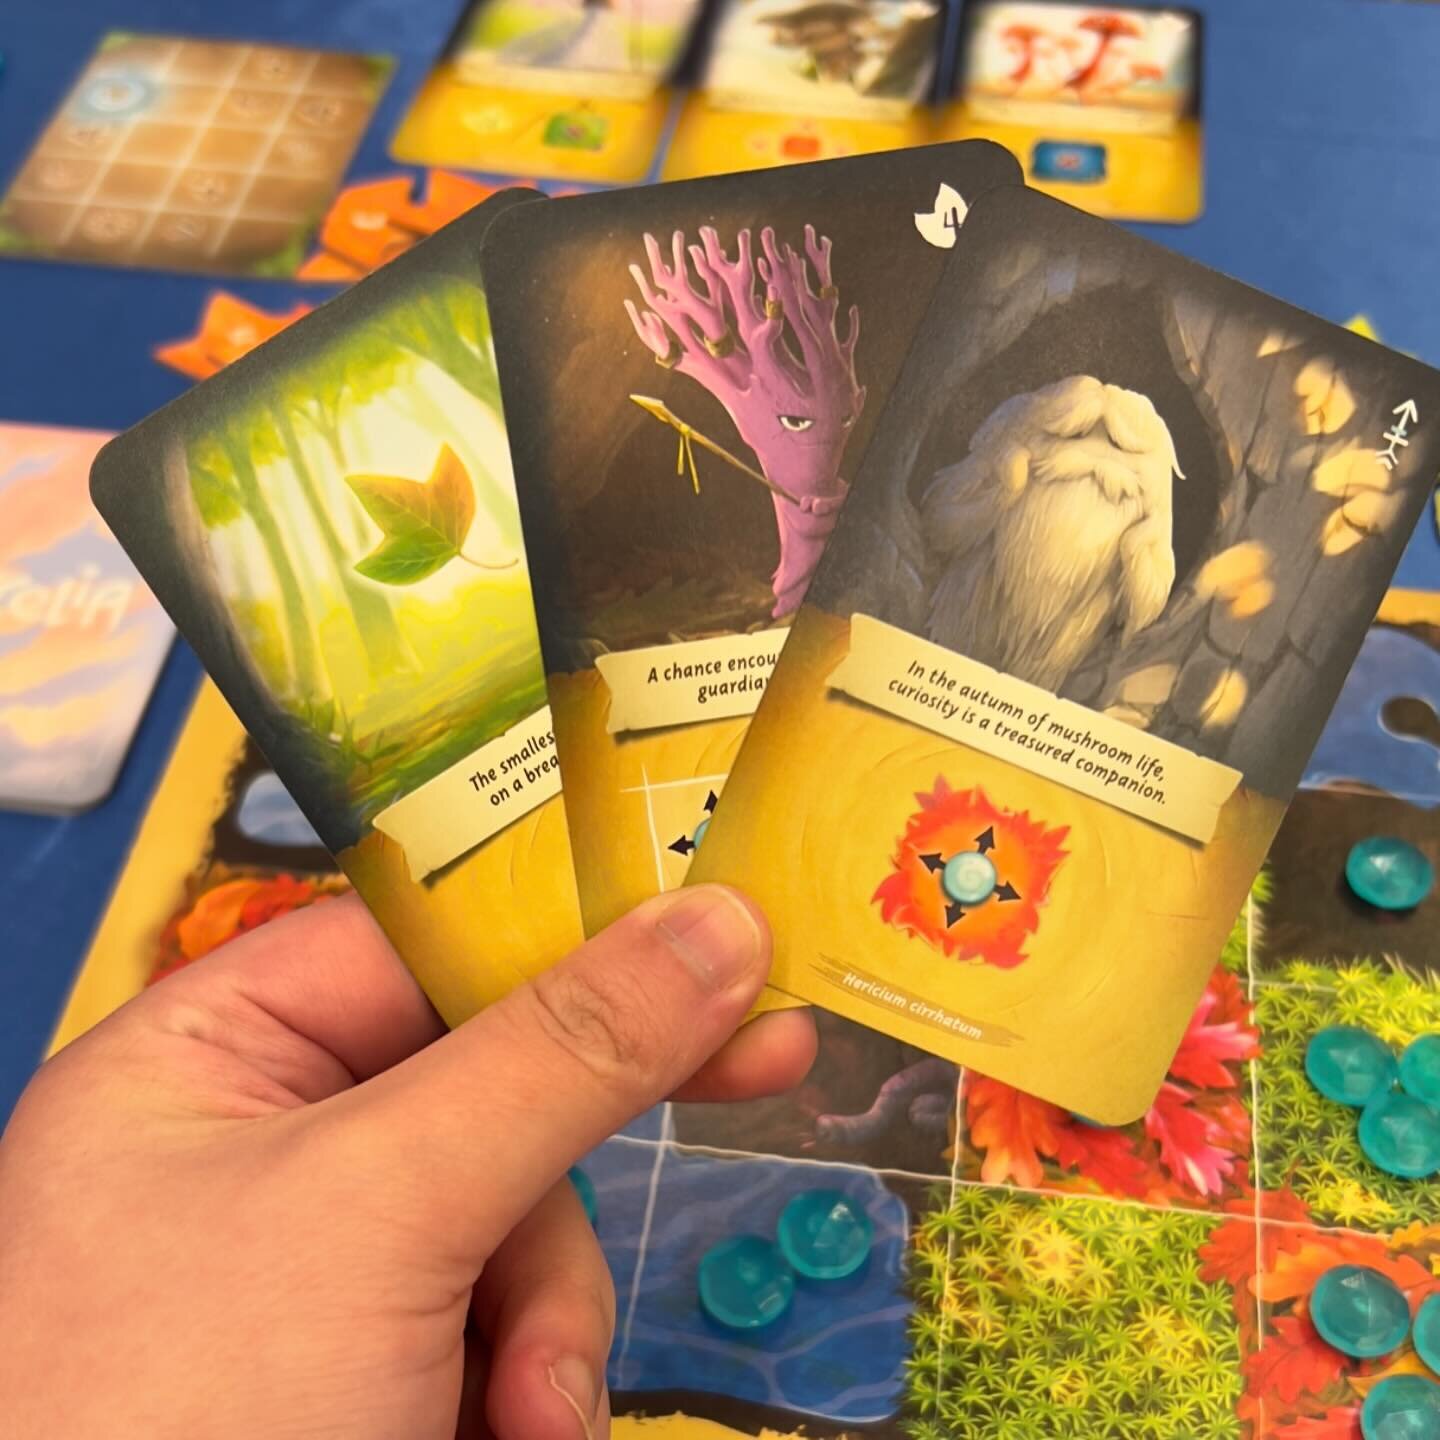 🇵🇹⬇️//🇬🇧 During the first official day we had the chance to play Samoa, Mycelia and Portas (prototype). We were also explaining games at the Maldito Games&rsquo; booth (with special focus on Applejack and The Isle of Cats). 😻
.
.
.
🇵🇹 No prime